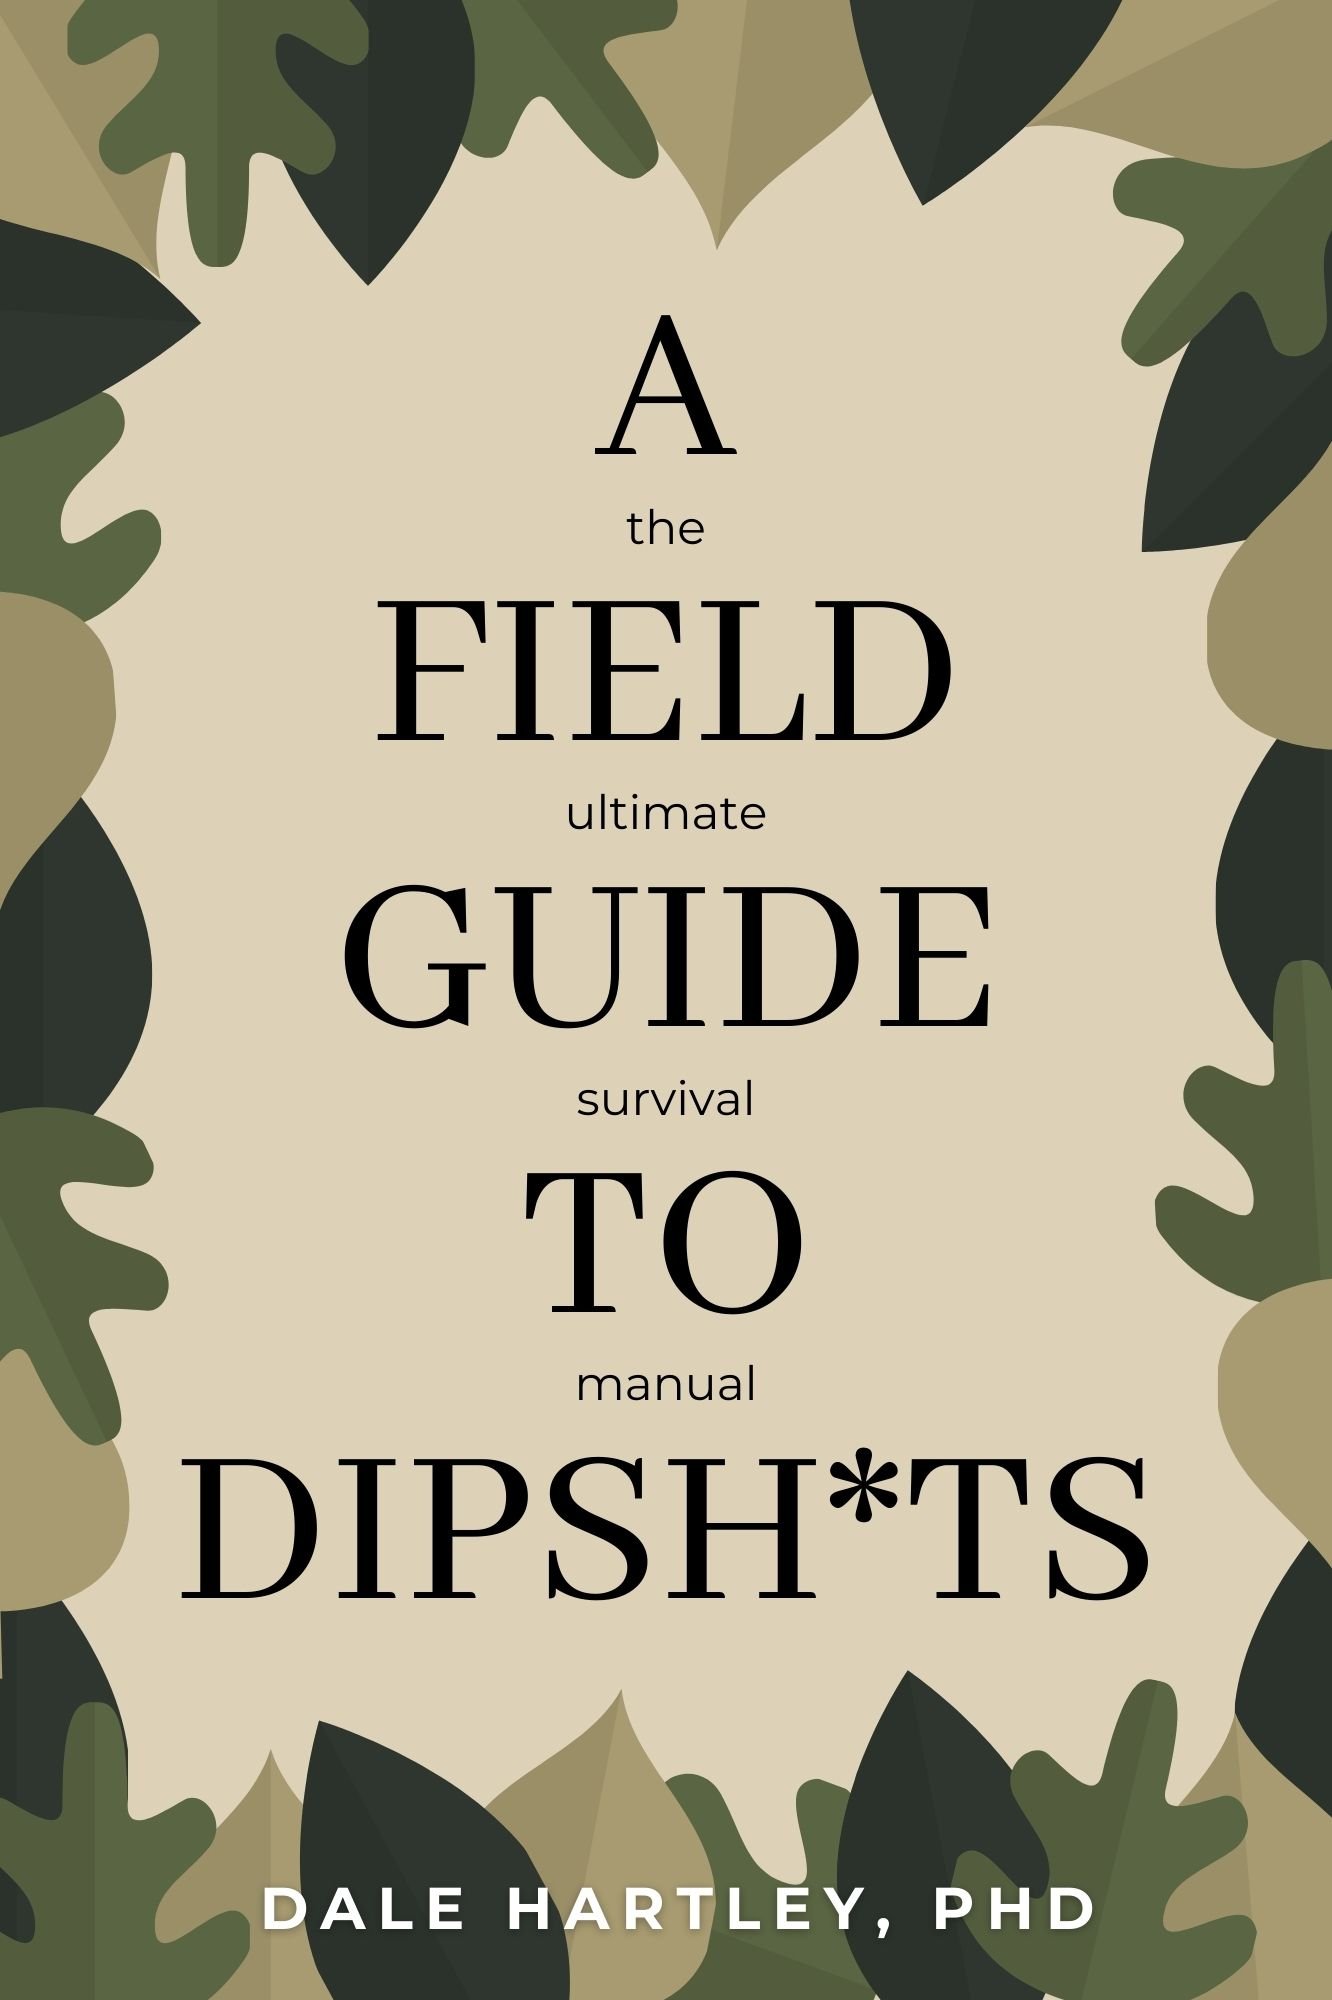 A Field Guide to Dipshts.jpg